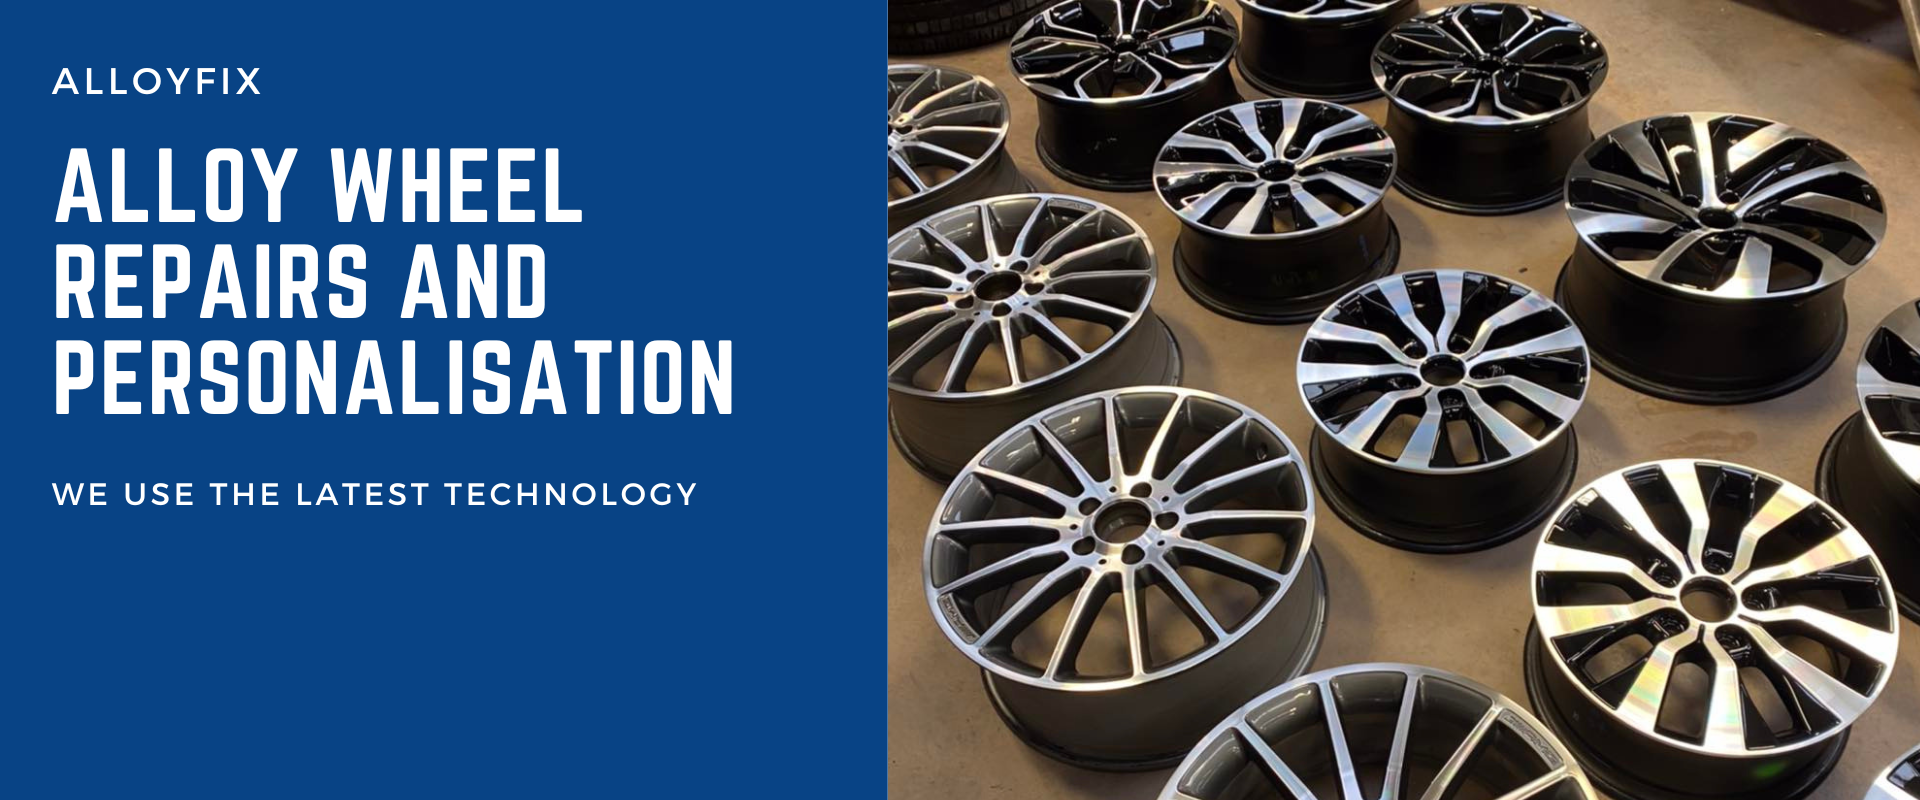 Alloy Wheel Repairs And Personalisation